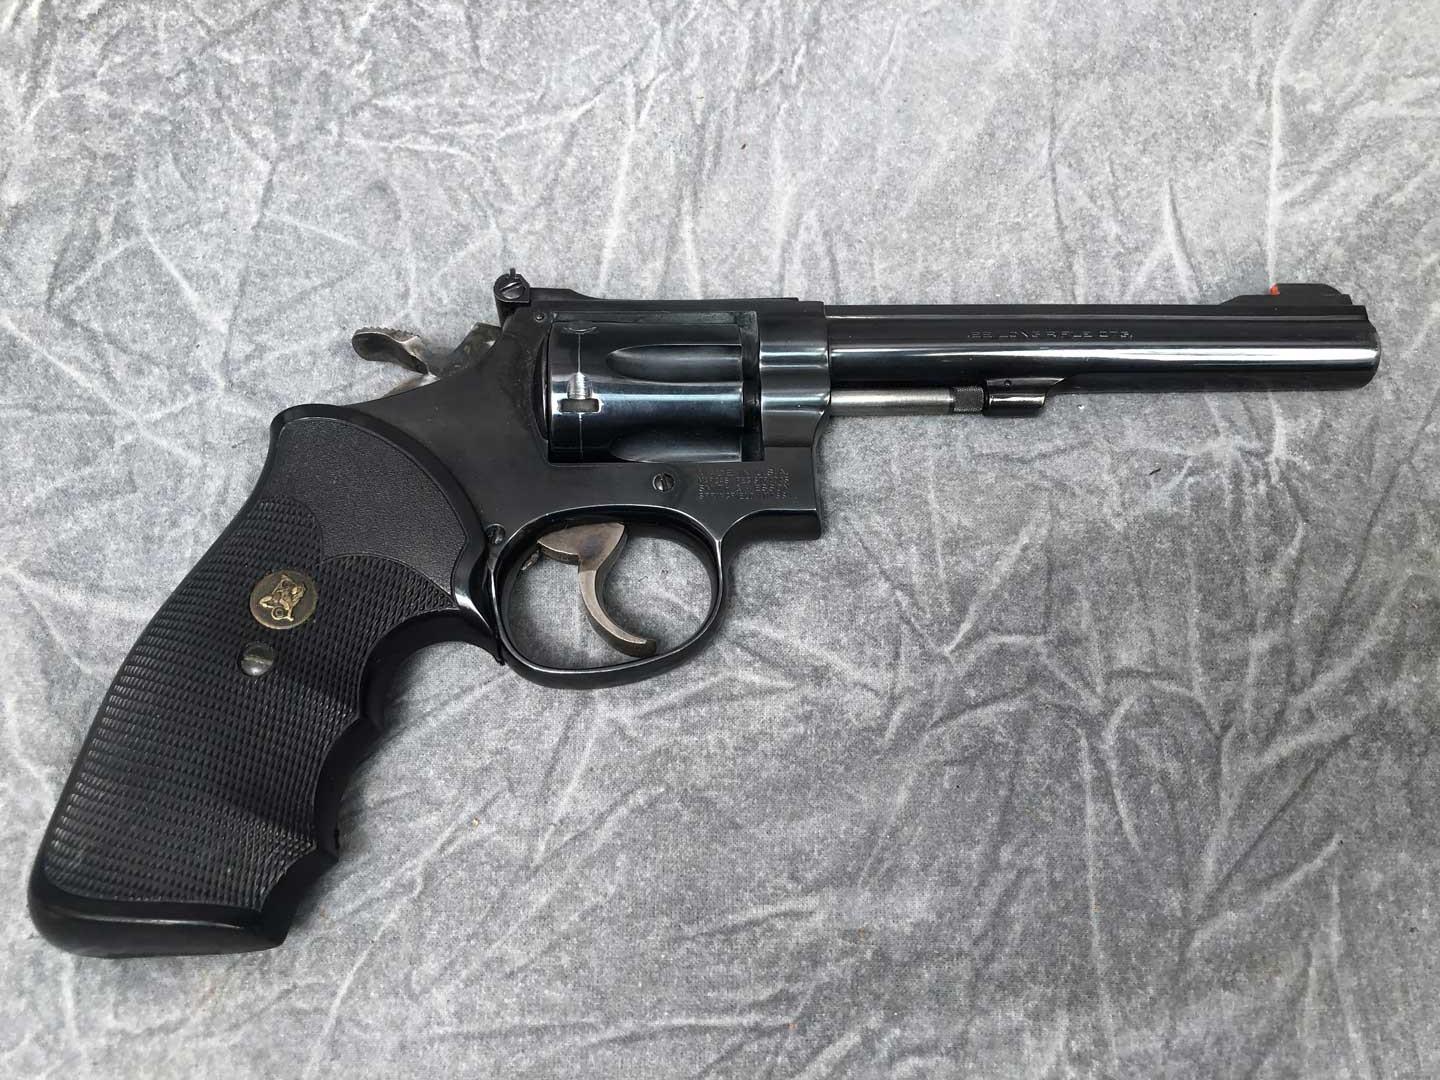 Smith & Wesson Model 17-5 Double Action Revolver